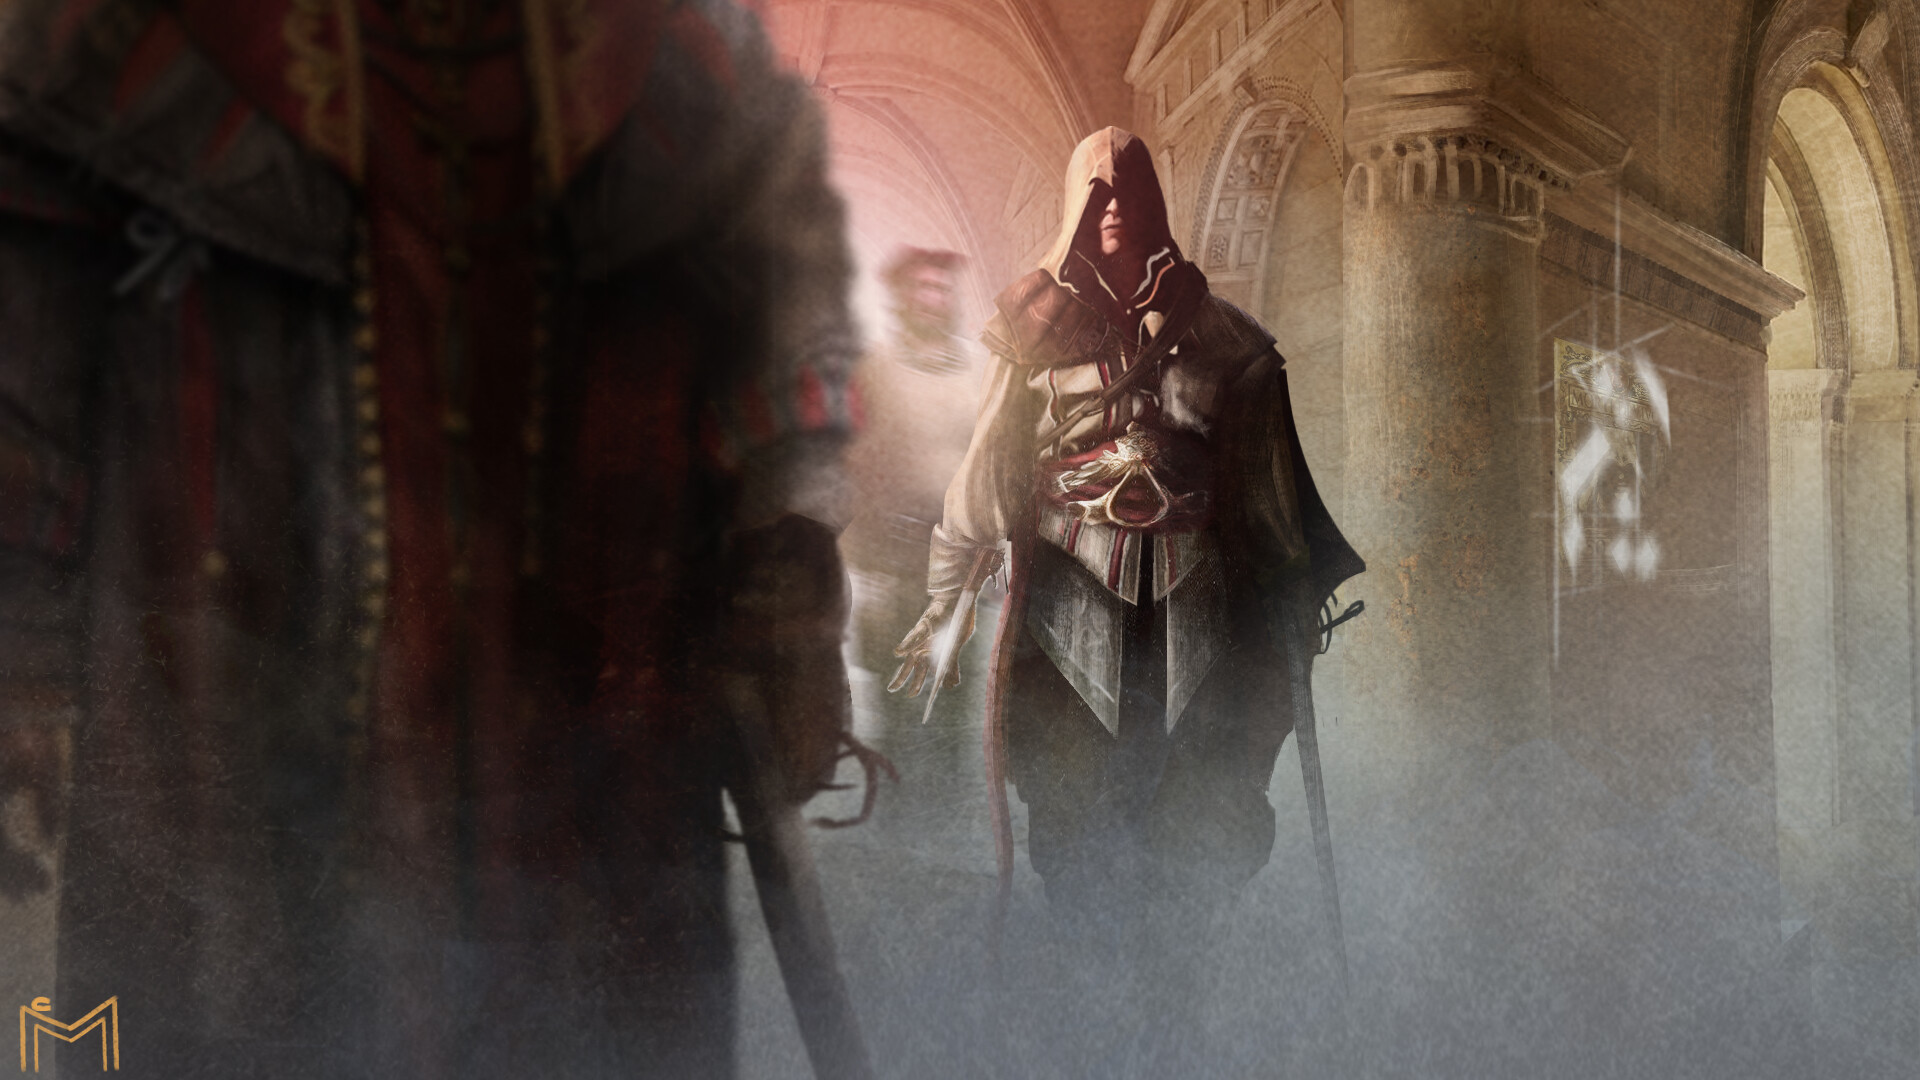 TweakGuides.com - Assassin's Creed 2 DRM - PCGamingWiki mirror